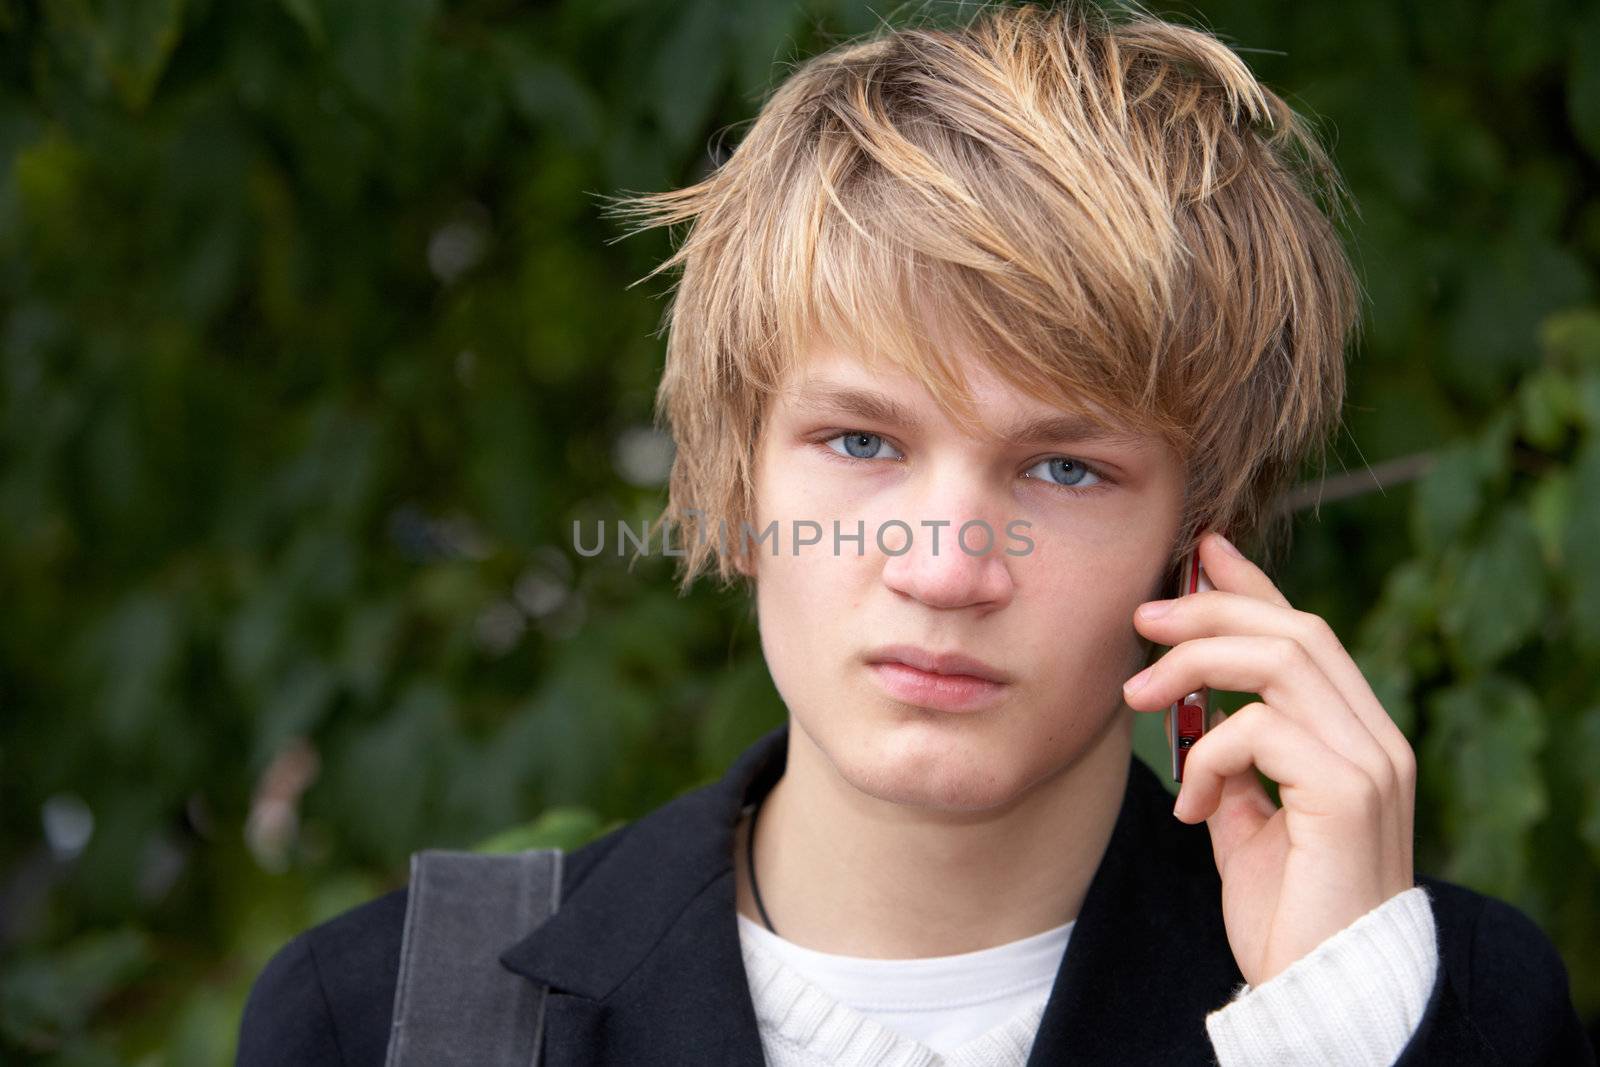 Teenage boy using mobile phone in city park, looking at camera